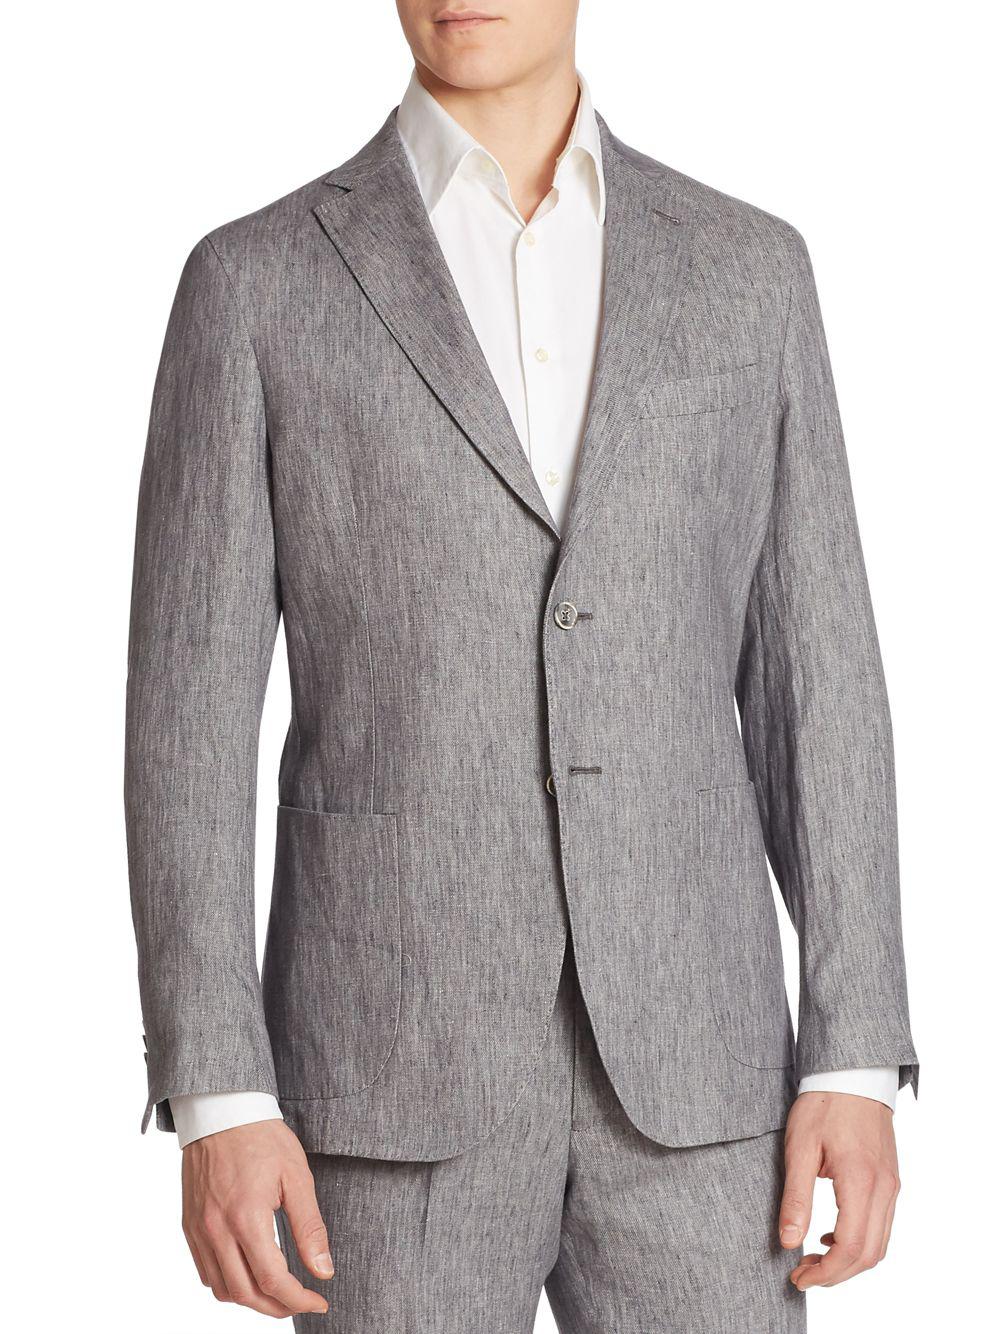 Lyst - Saks Fifth Avenue Garment-washed Linen Suit Jacket in Gray for ...